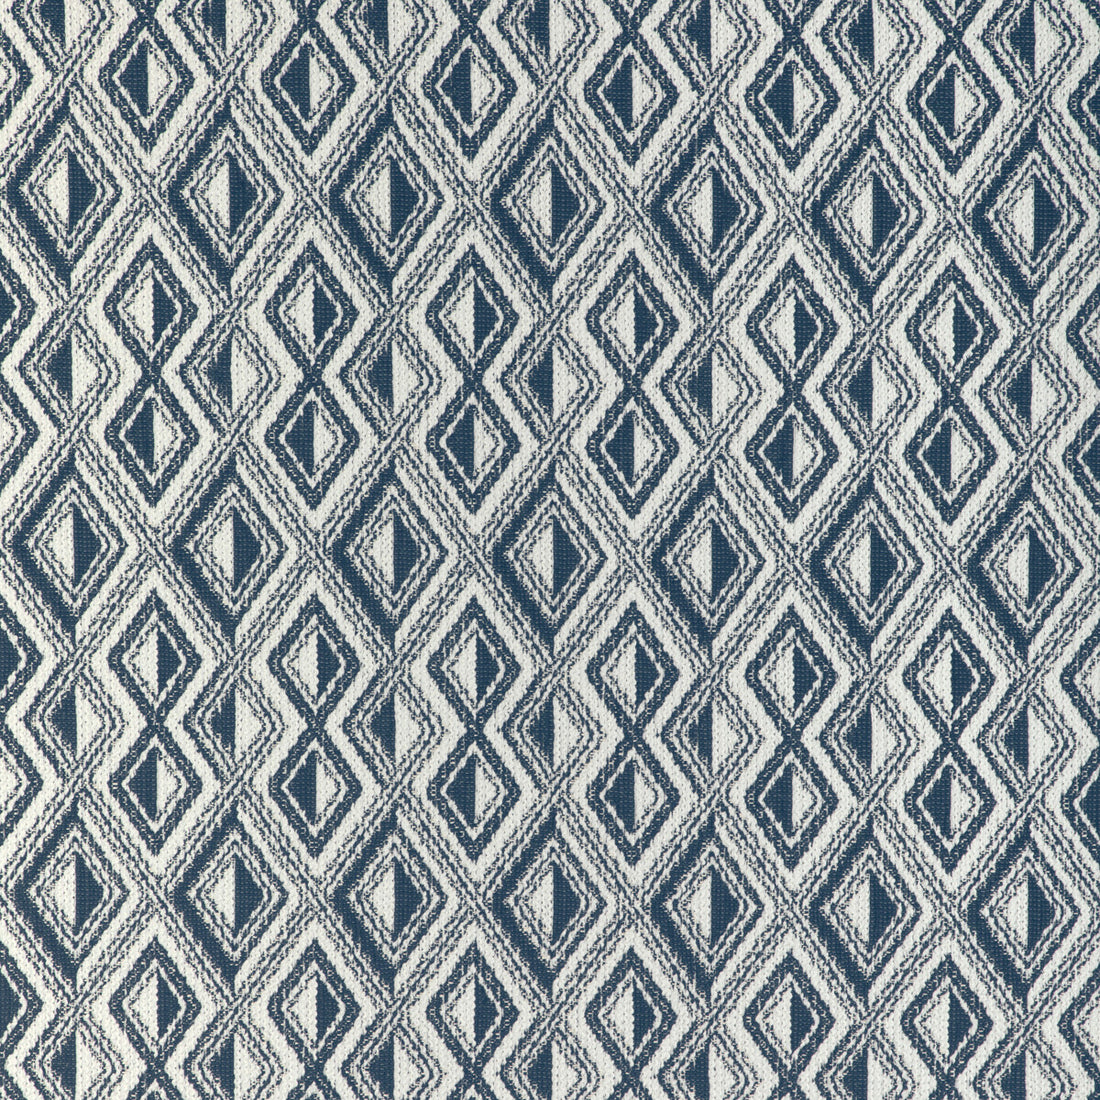 Rough Cut fabric in marine color - pattern 37058.51.0 - by Kravet Design in the Thom Filicia Latitude collection